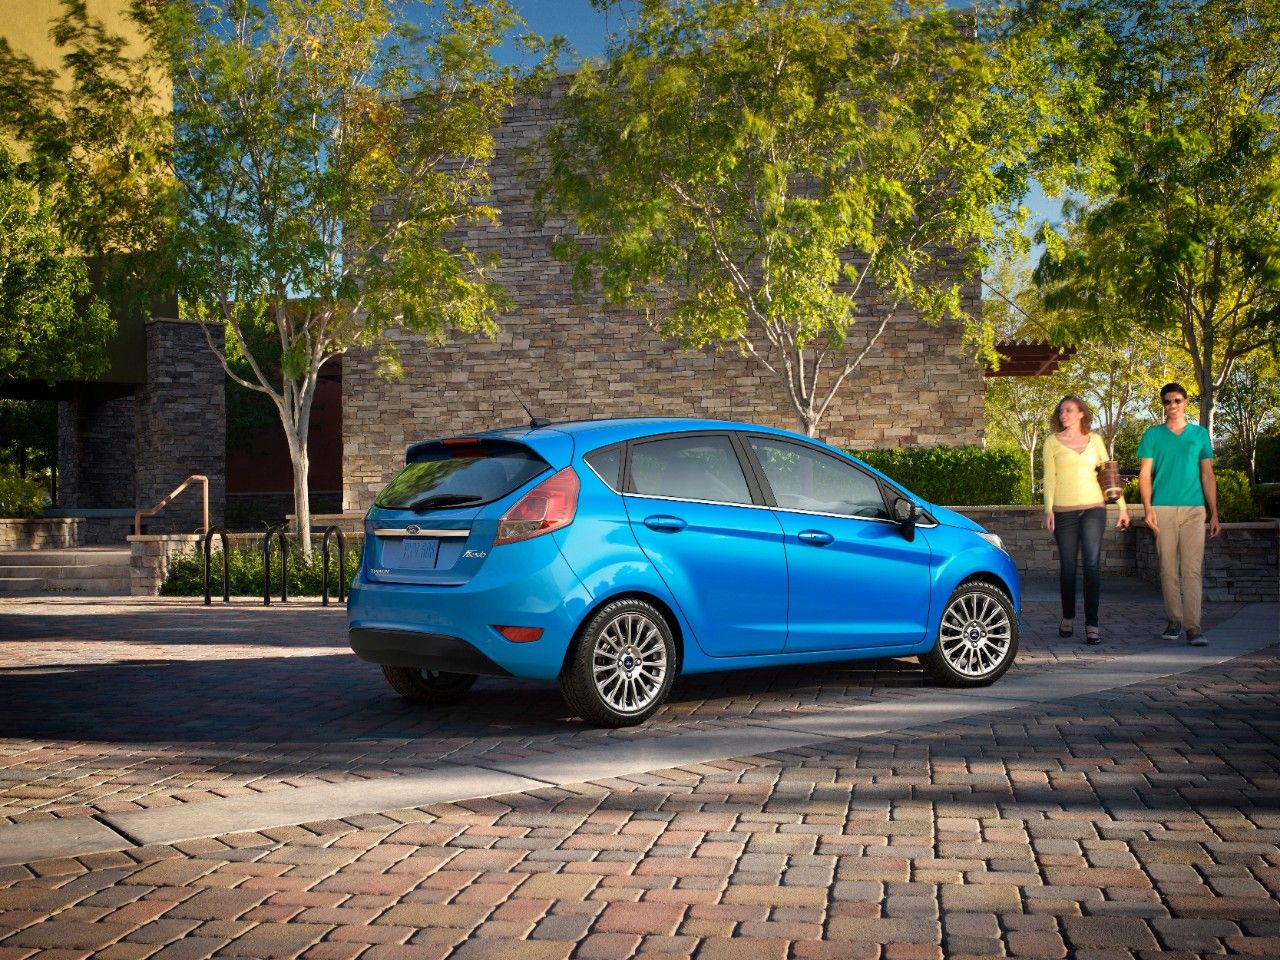 ford-extends-warranty-for-problematic-dual-clutch-transmissions-driving